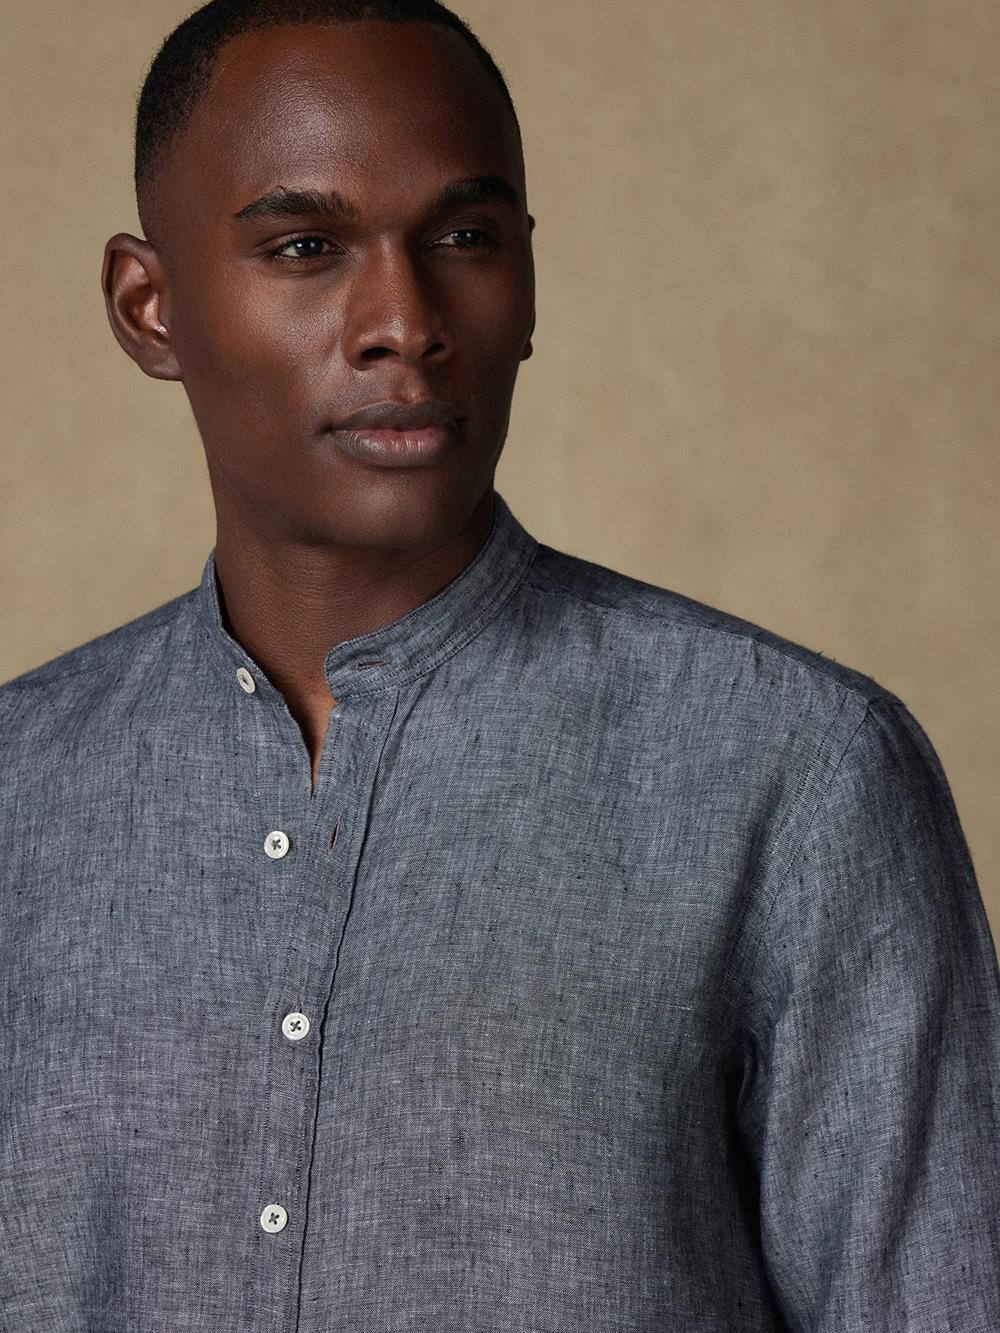 Olaf collarless slim fit shirt in anthracite linen